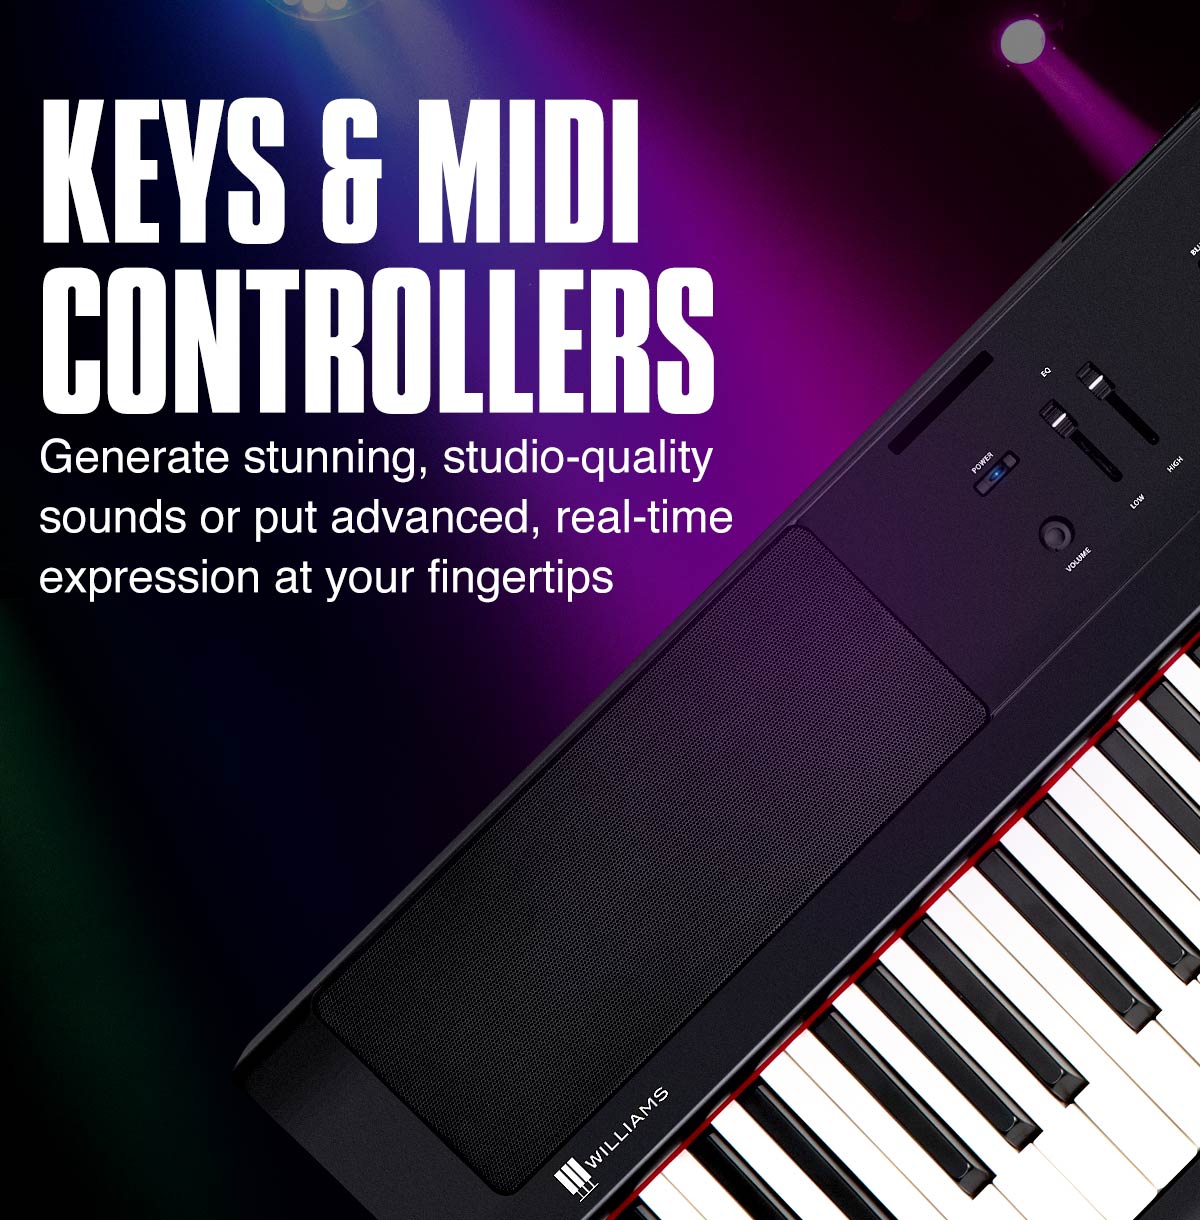 Keys and MIDI controllers. Generate stunning, studio-quality sounds or put advance, real time expression at your fingertips.